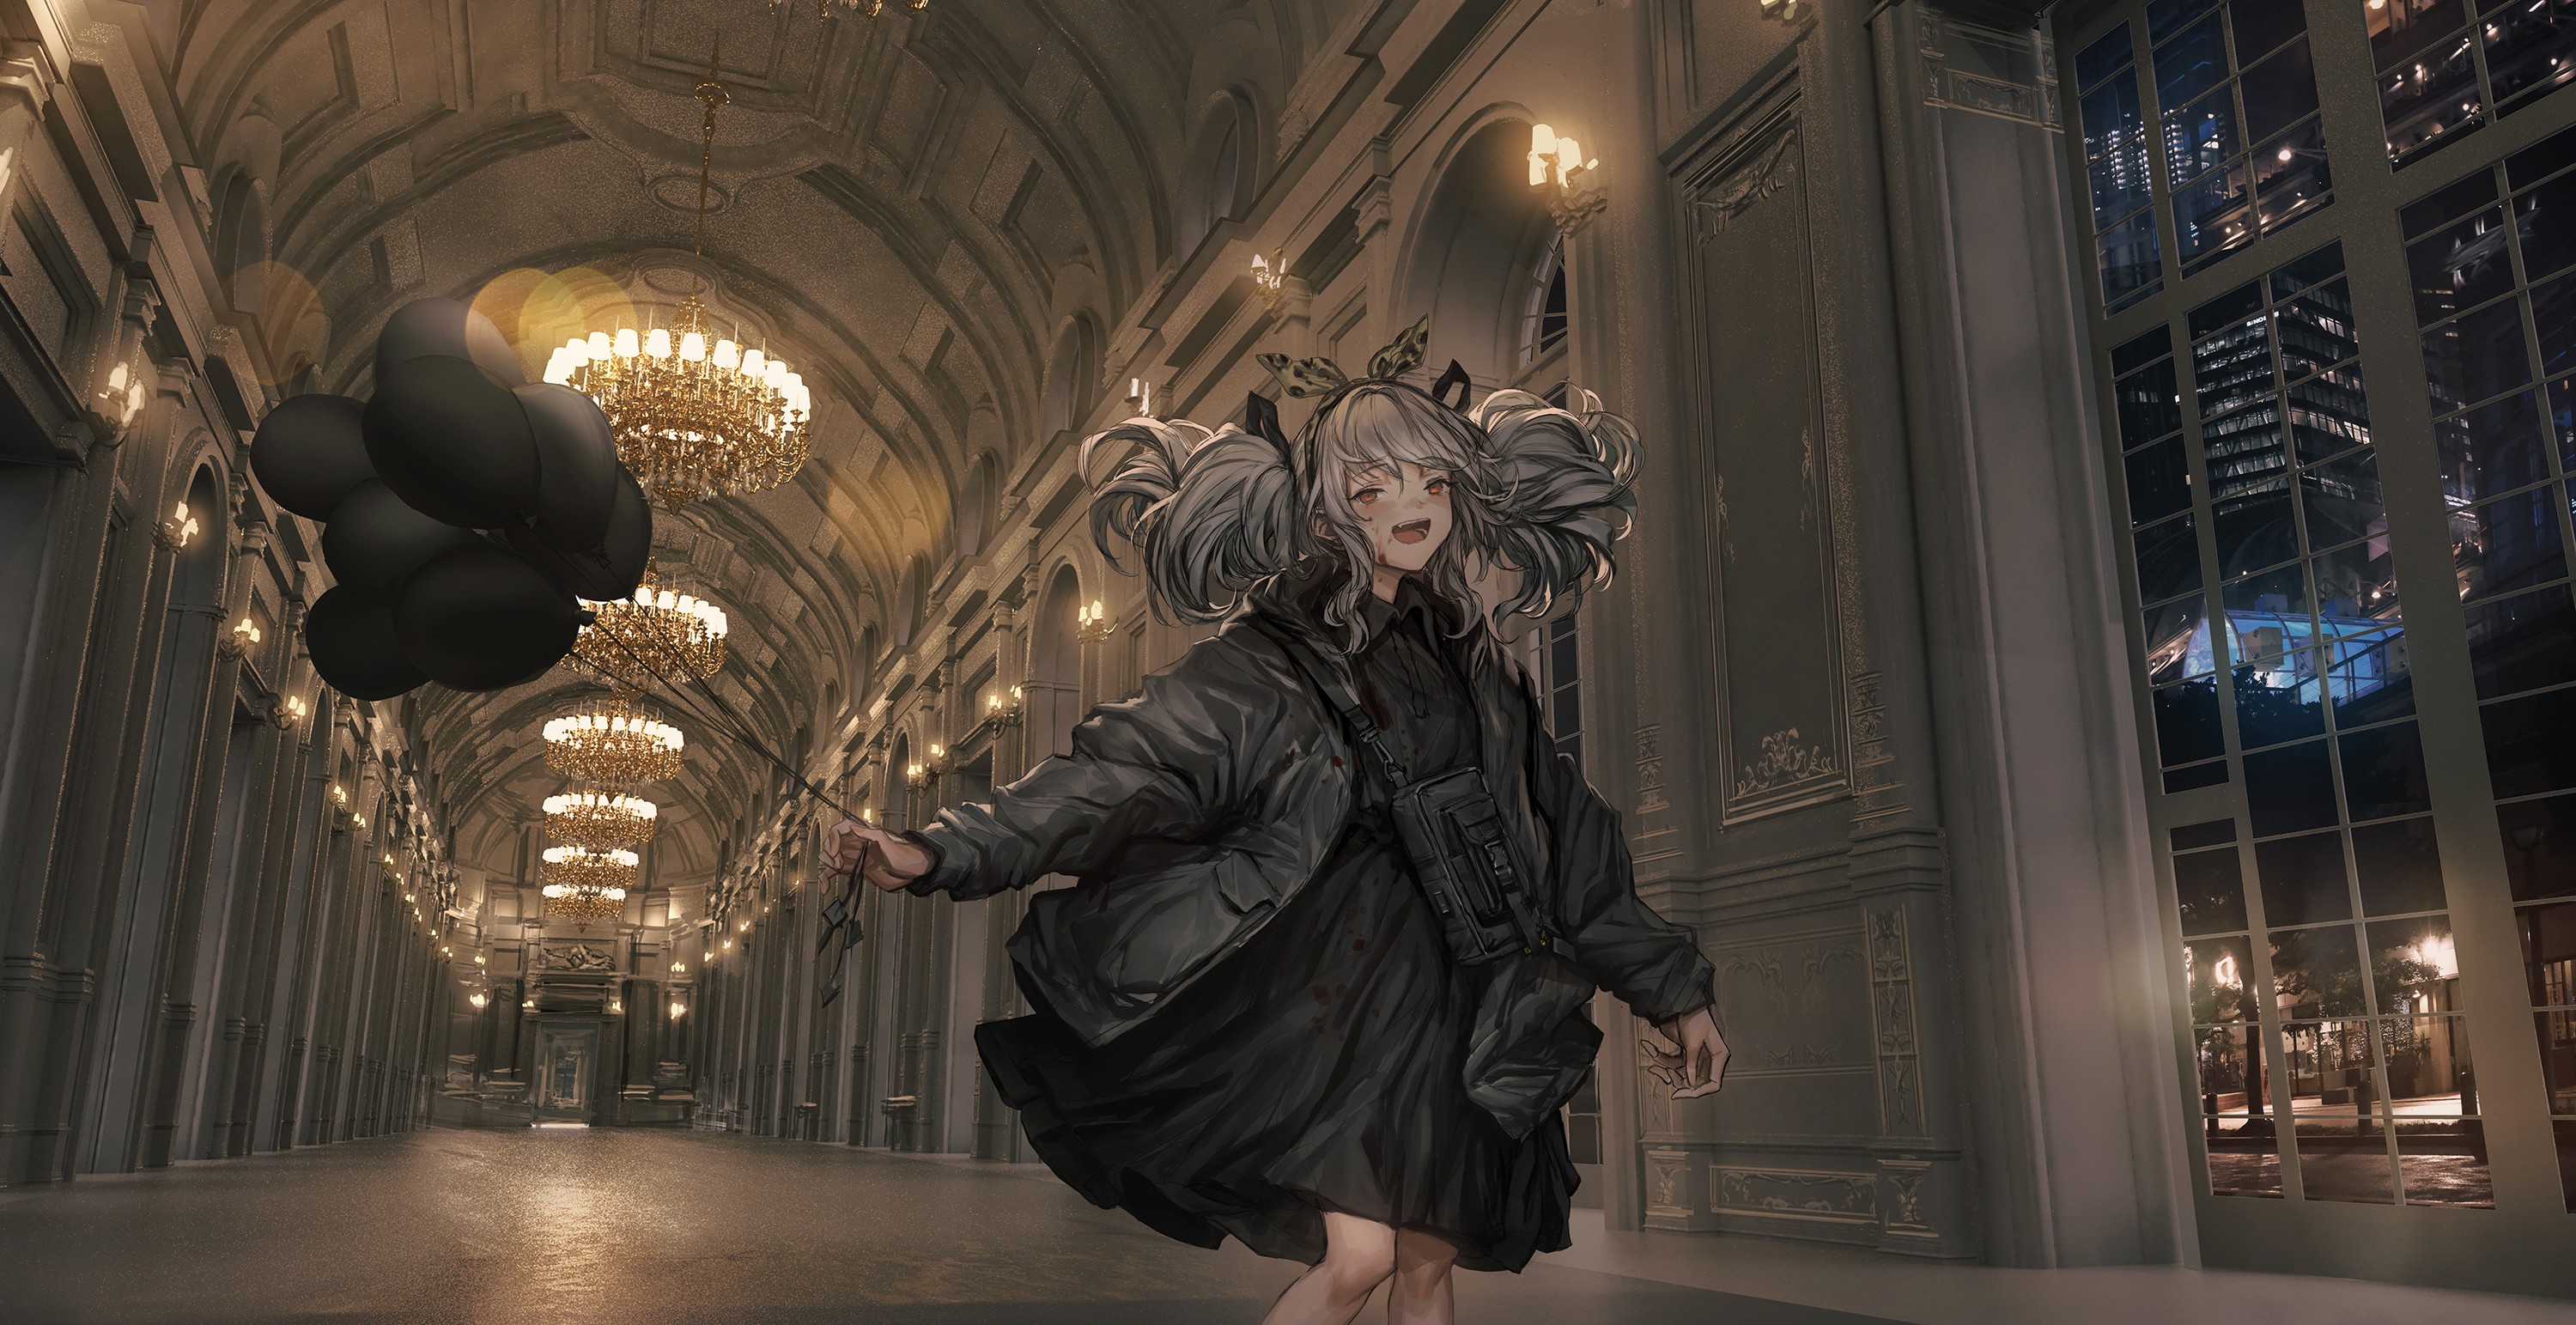 LM7 Anime Balloon Chandeliers Bokeh Architecture Candles Anime Girls Twintails Grey Hair 3000x1543